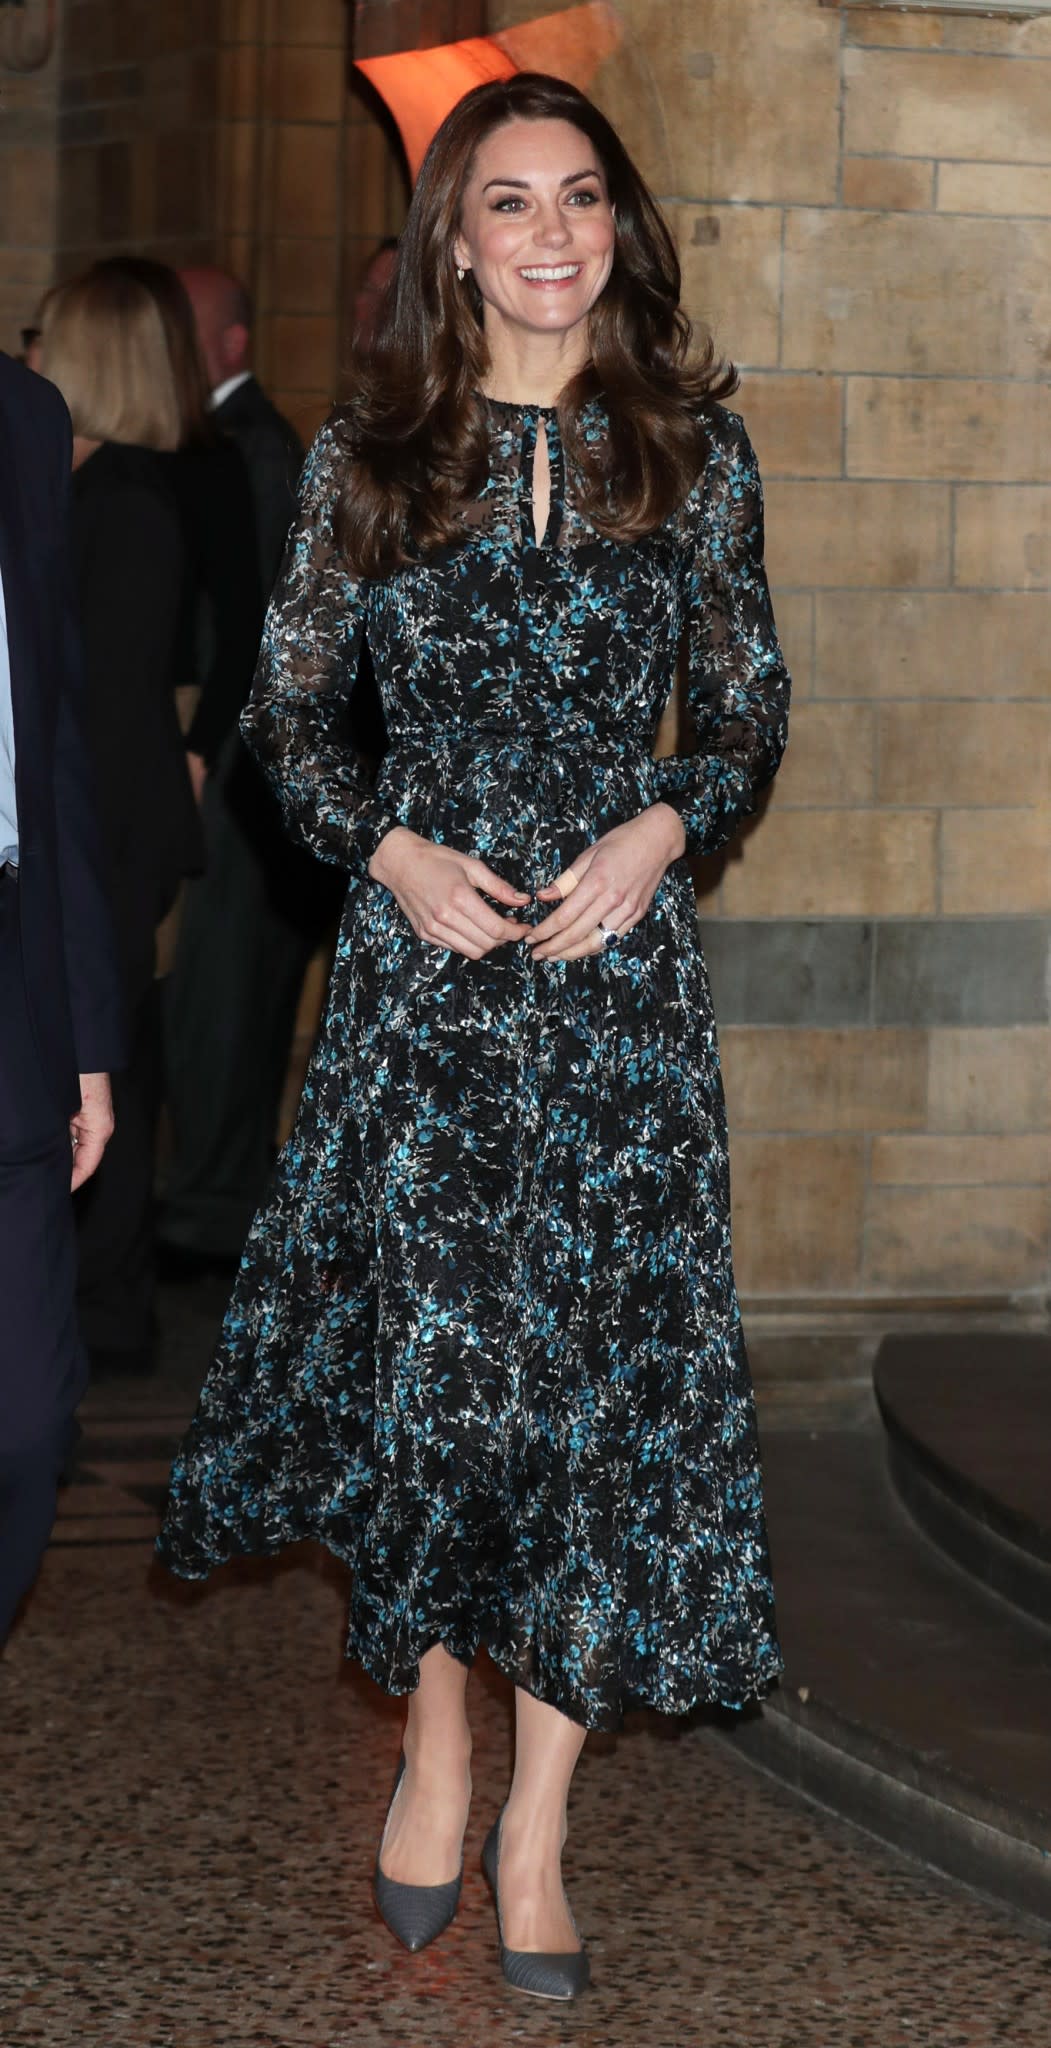 Kate Middleton recently attended a children's tea party at the Natural History Museum to celebrate Dippy the Diplodocus on November 22, 2016 in London. (Photo: Getty Images)